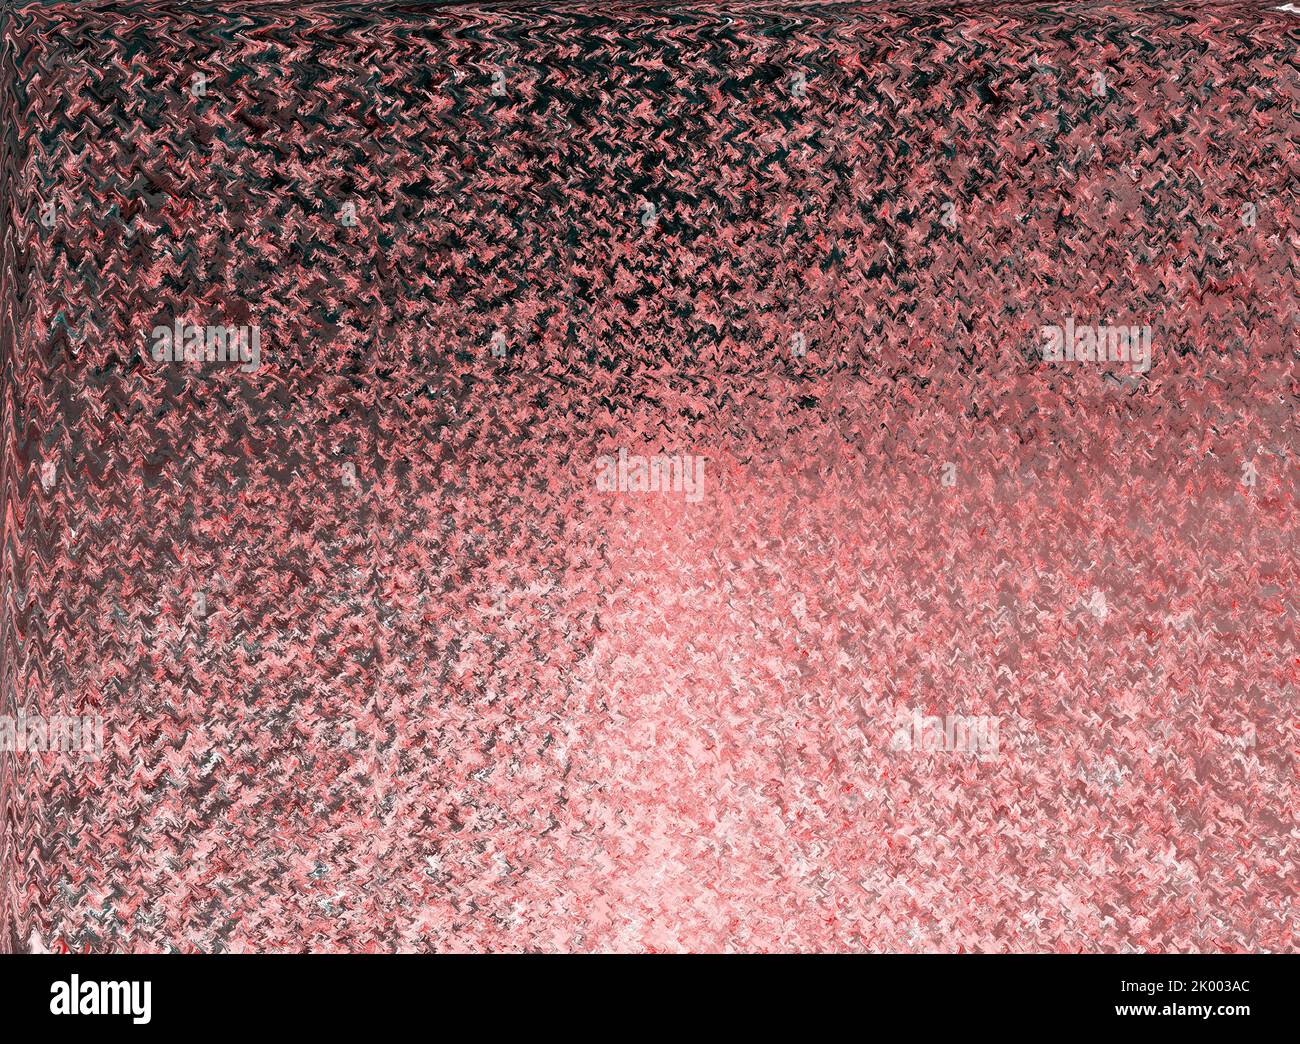 Abstract background of red and pink, a combination of red with shades of red and pink for an abstract background Stock Photo